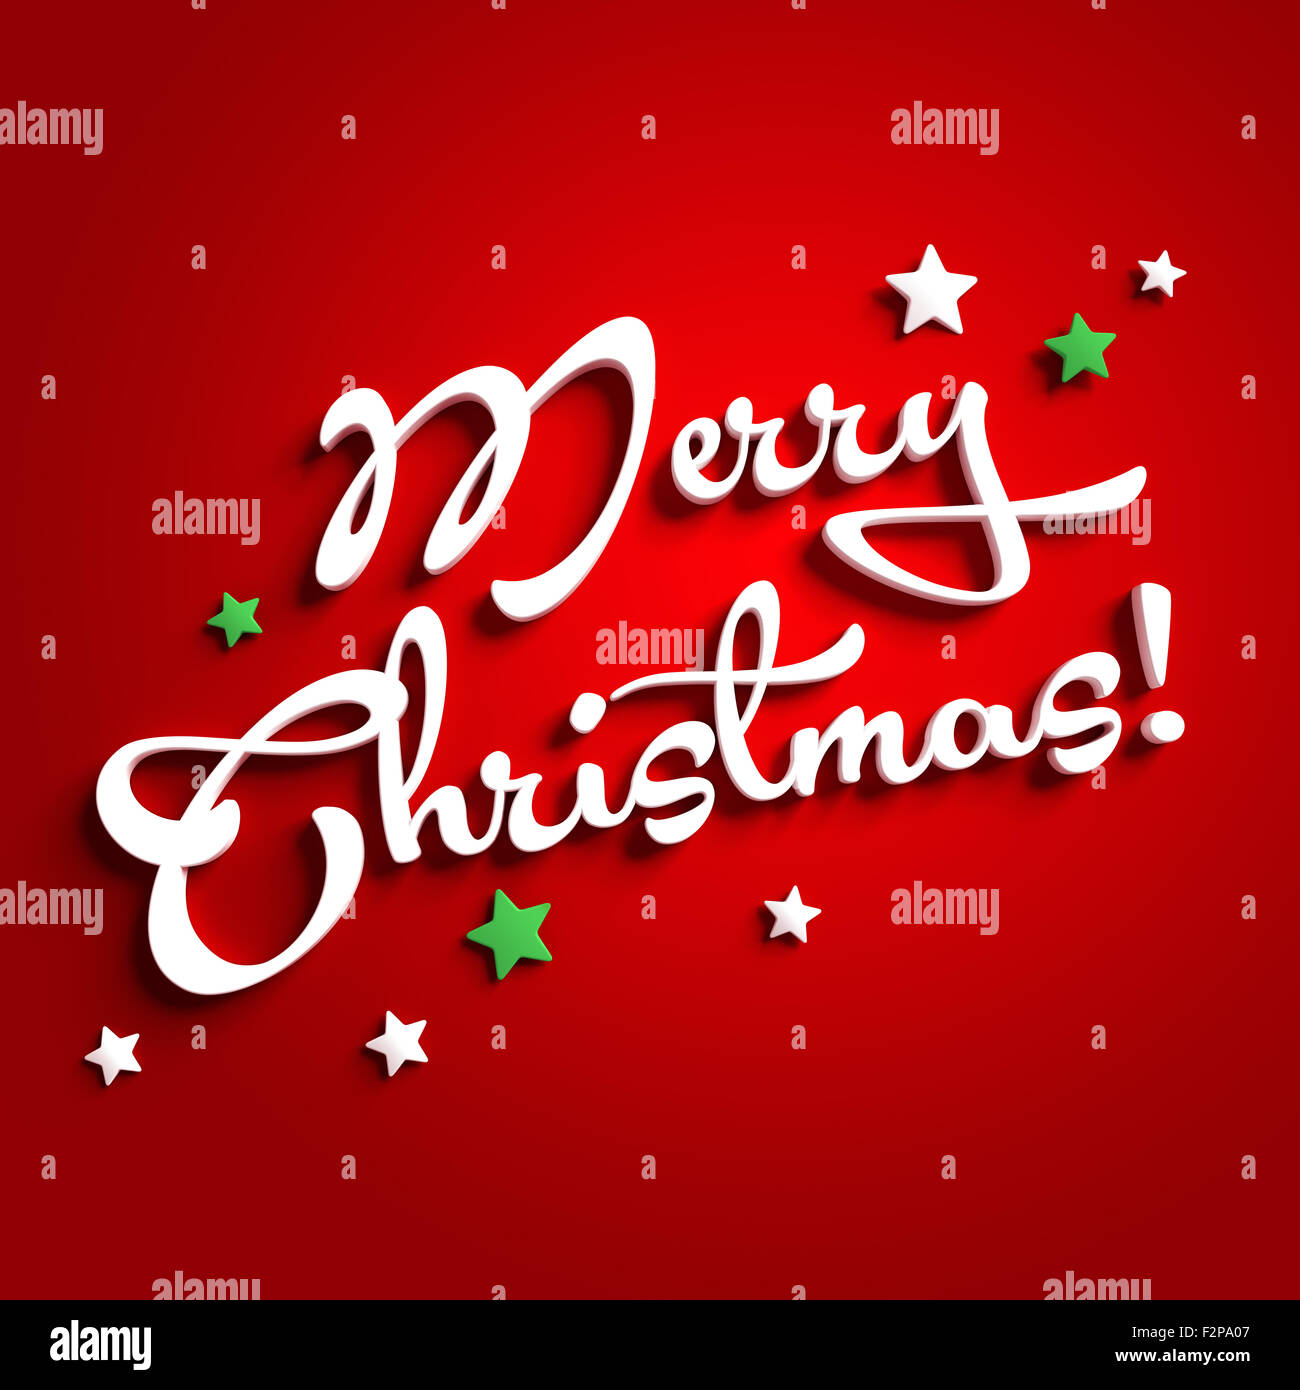 Merry Christmas white letters upon red background with star shapes Stock Photo